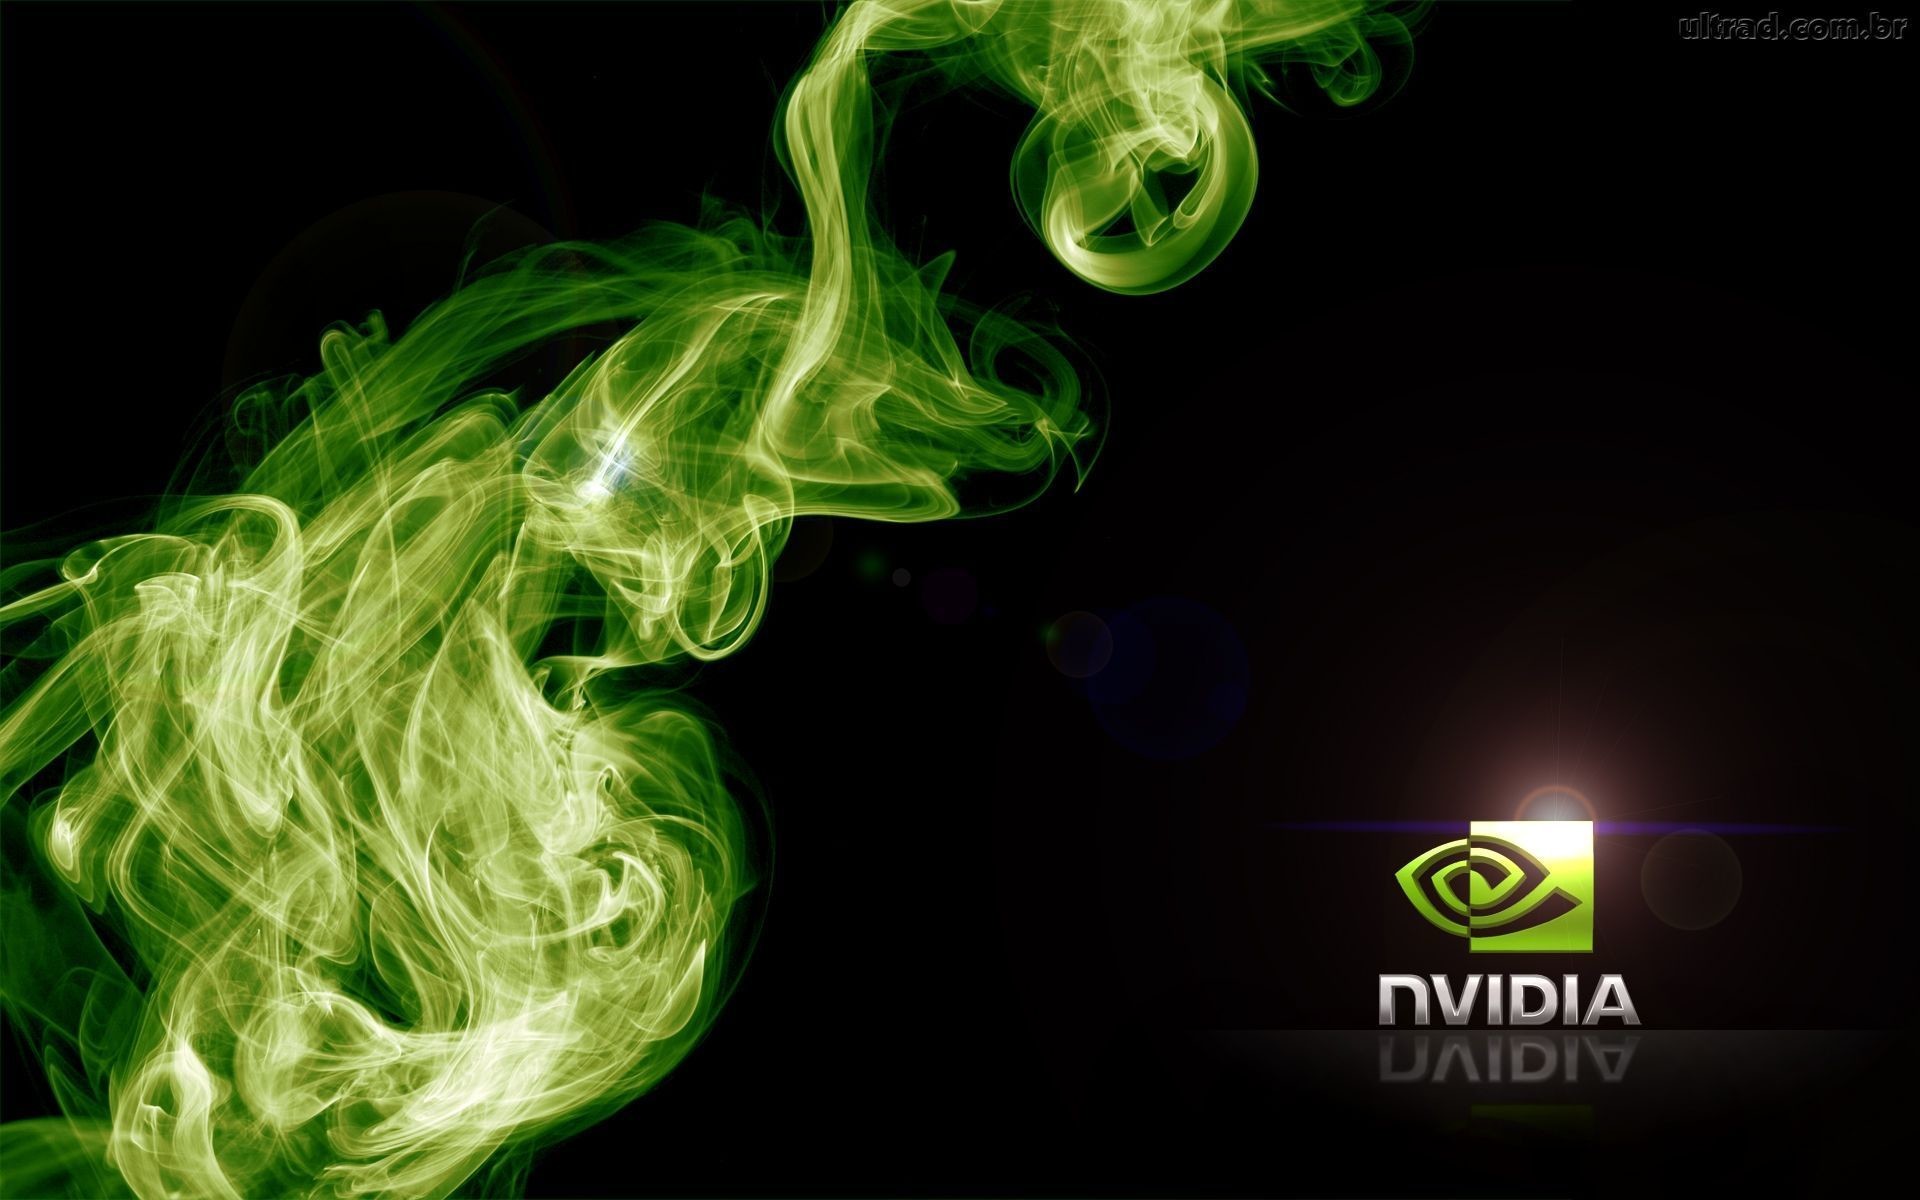 1920x1200 Gallery for - download nvidia wallpaper